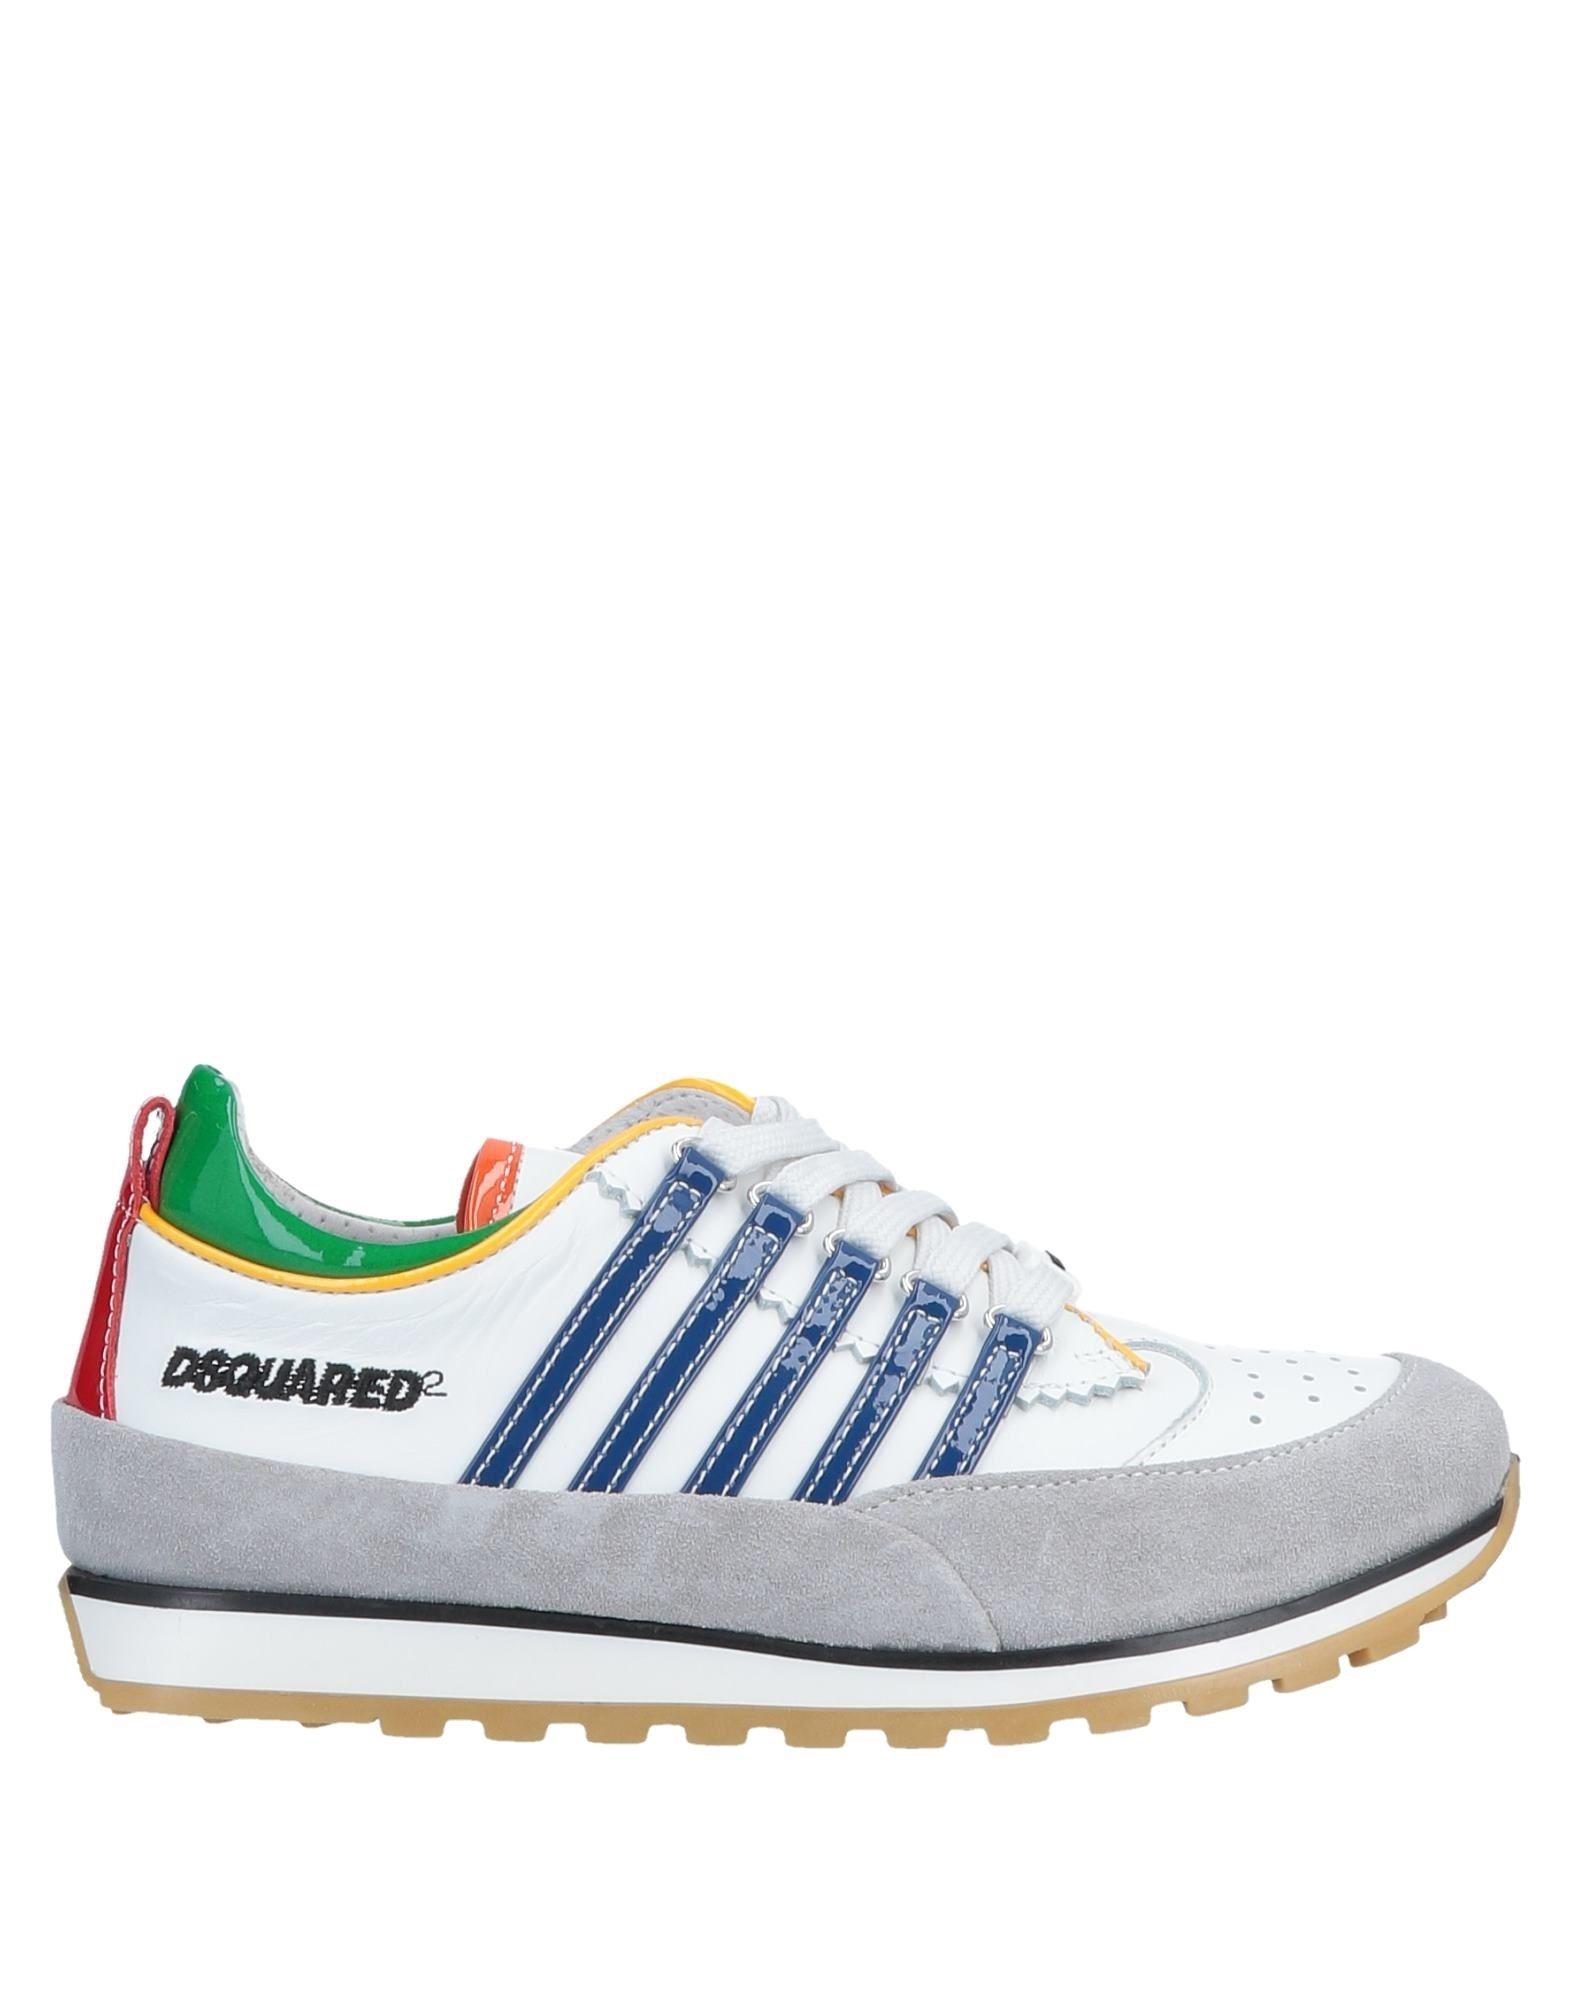 yoox dsquared2 shoes